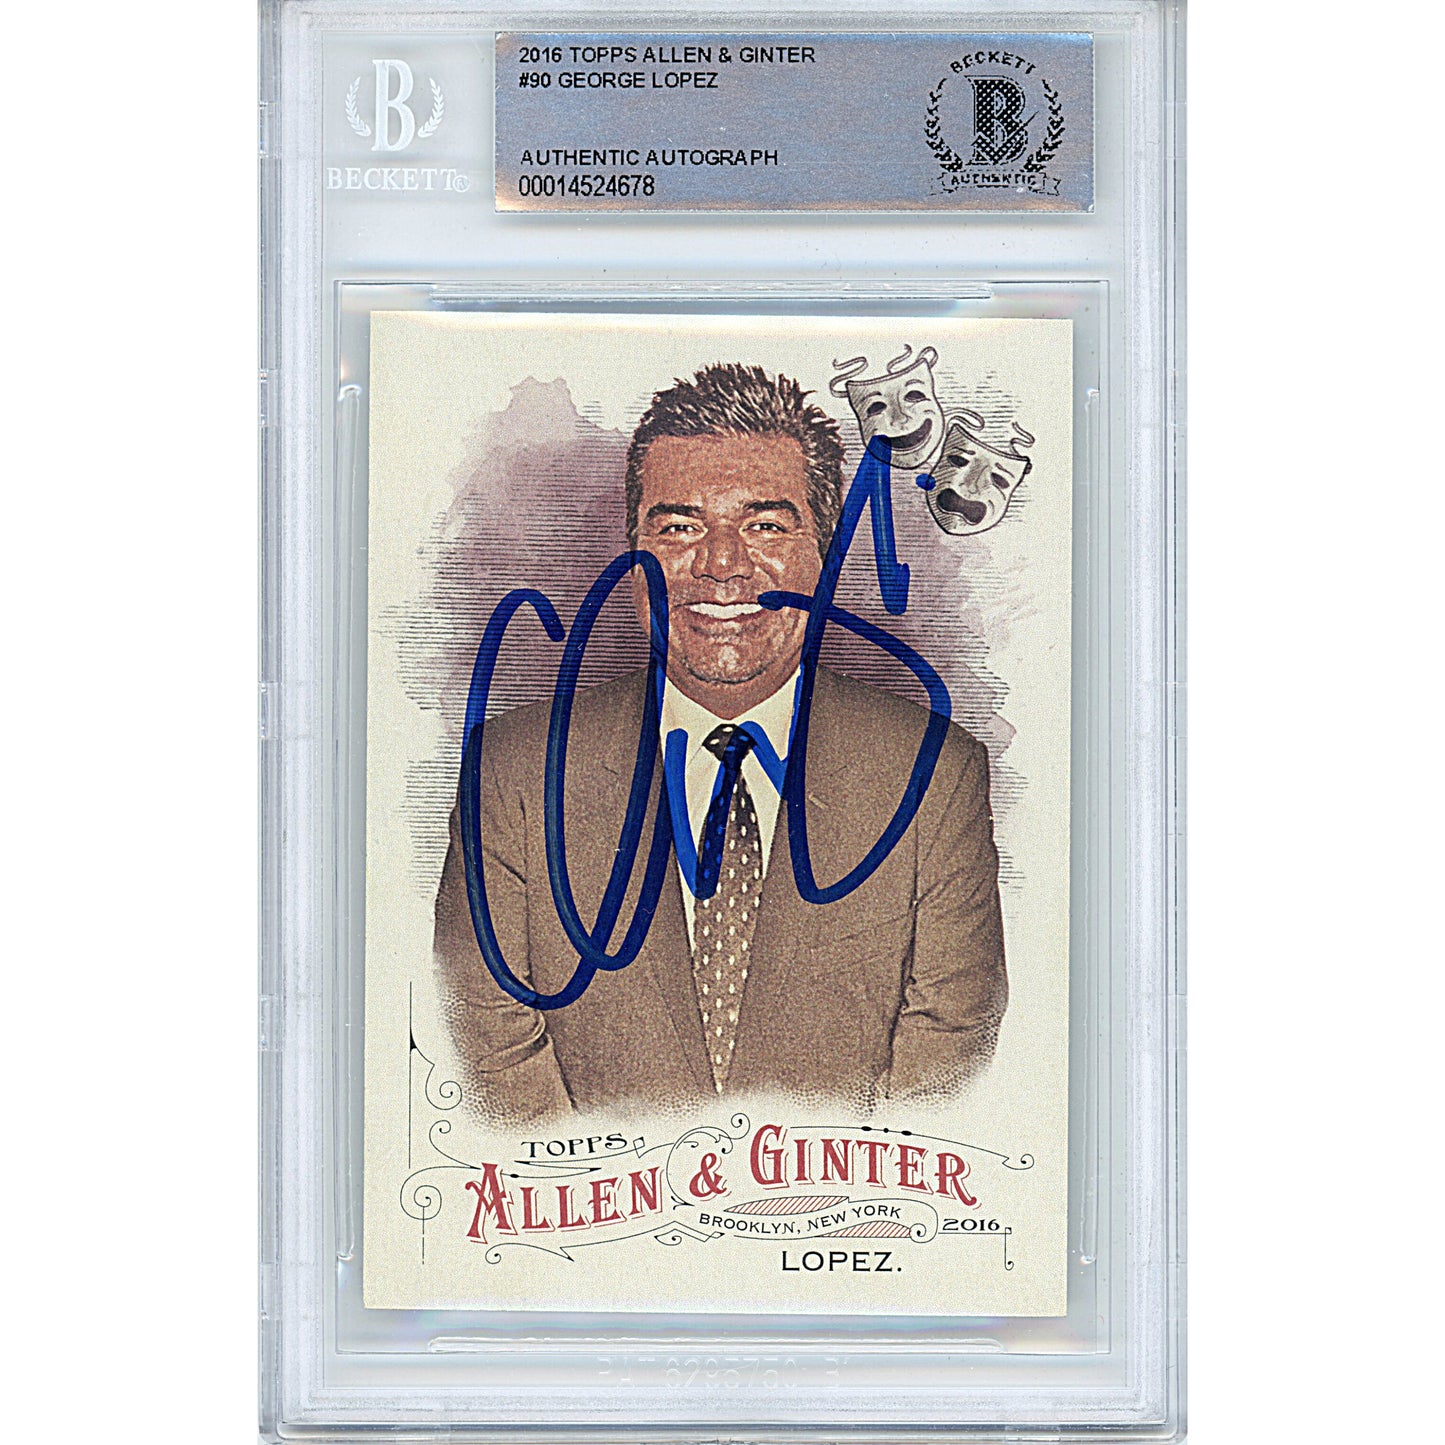 Hollywood- Autographed- George Lopez Signed 2016 Topps Allen and Ginter's Baseball Trading Card Beckett Authentication Slabbed 00014524678 - 101